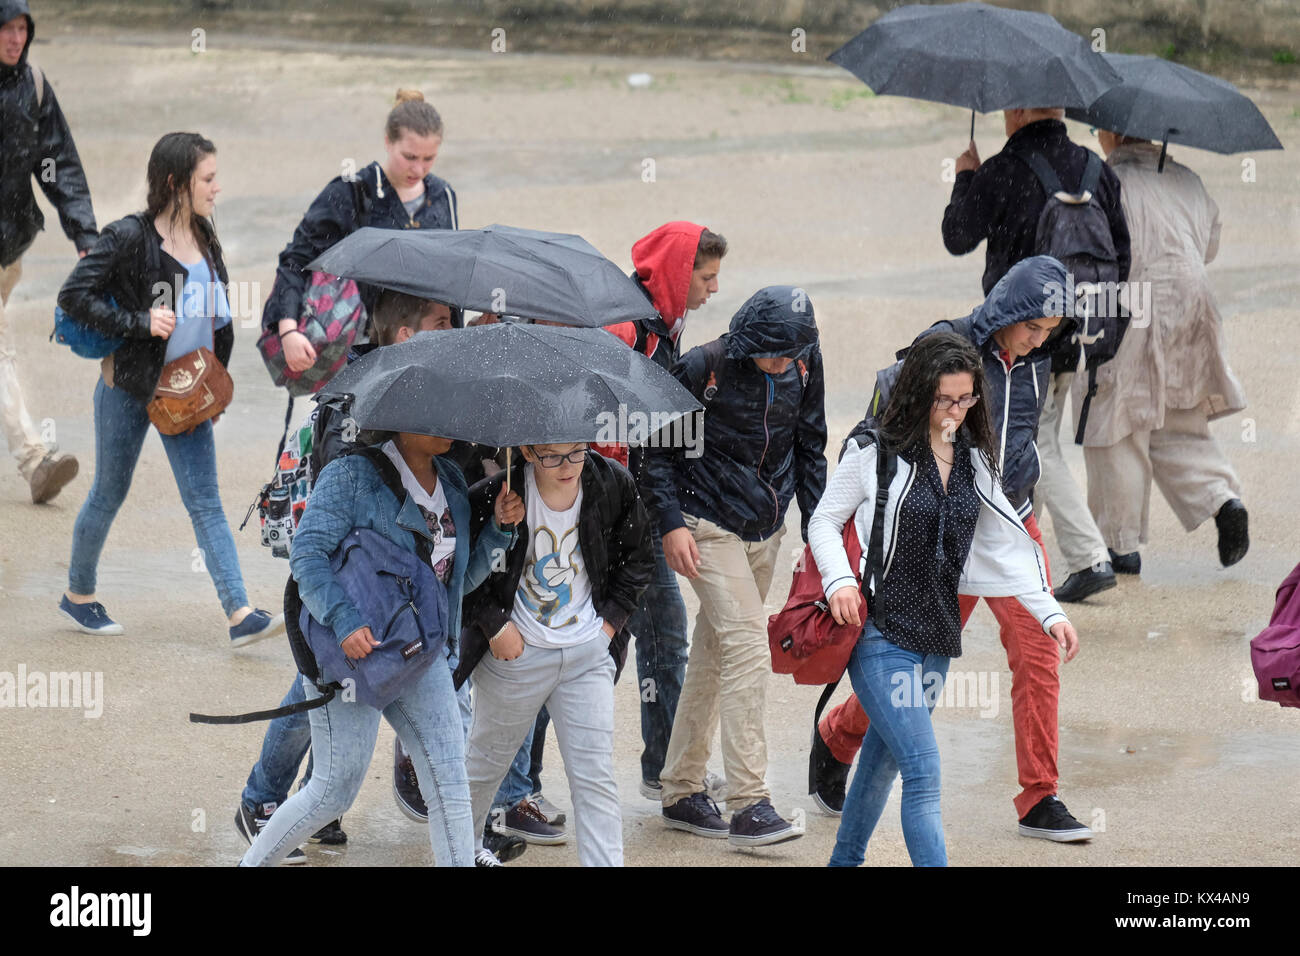 A Group of young people caught in a downpour, Paris, France Stock Photo